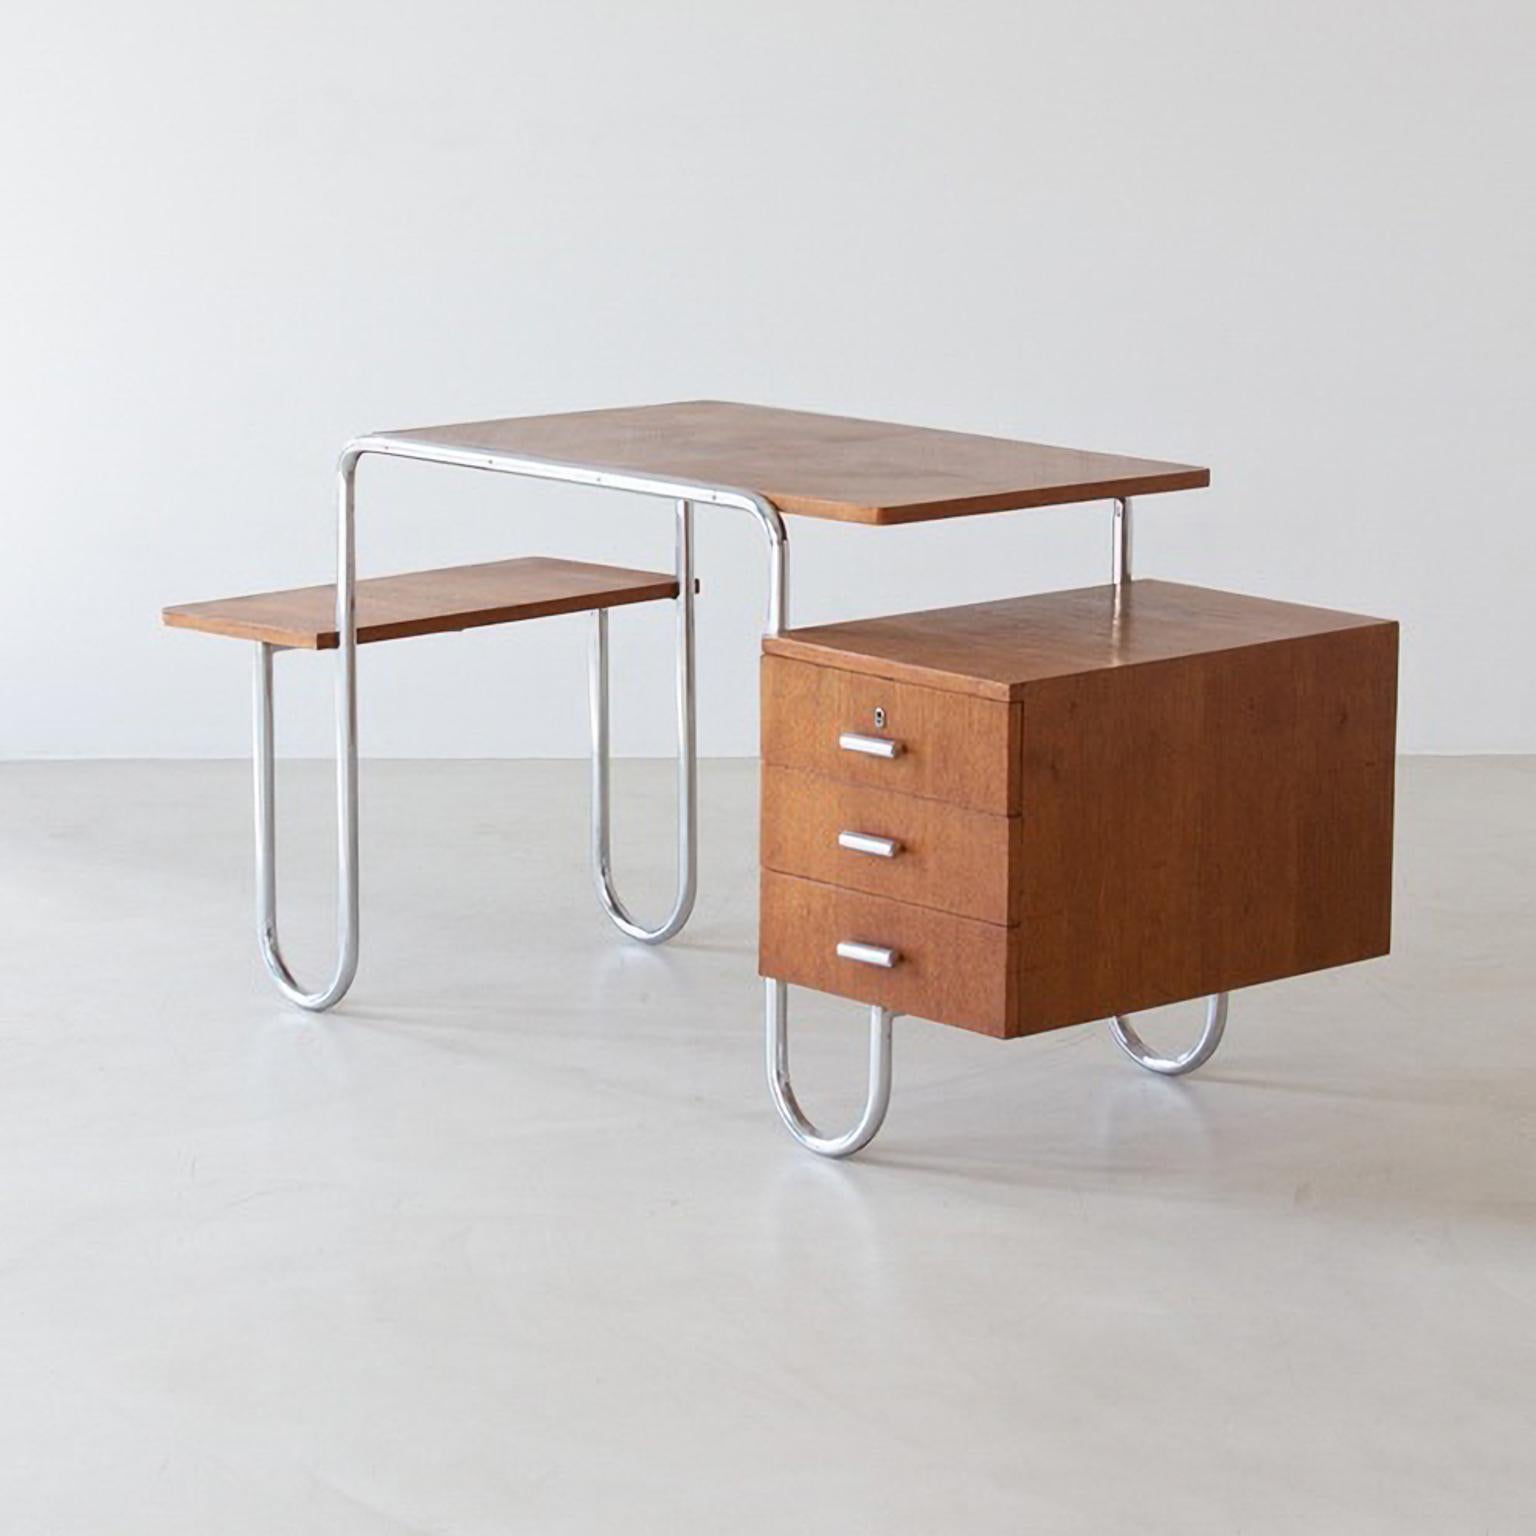 German Bauhaus Tubular Steel Desk by André Lurçat, Manufactured by Thonet, circa. 1935 For Sale